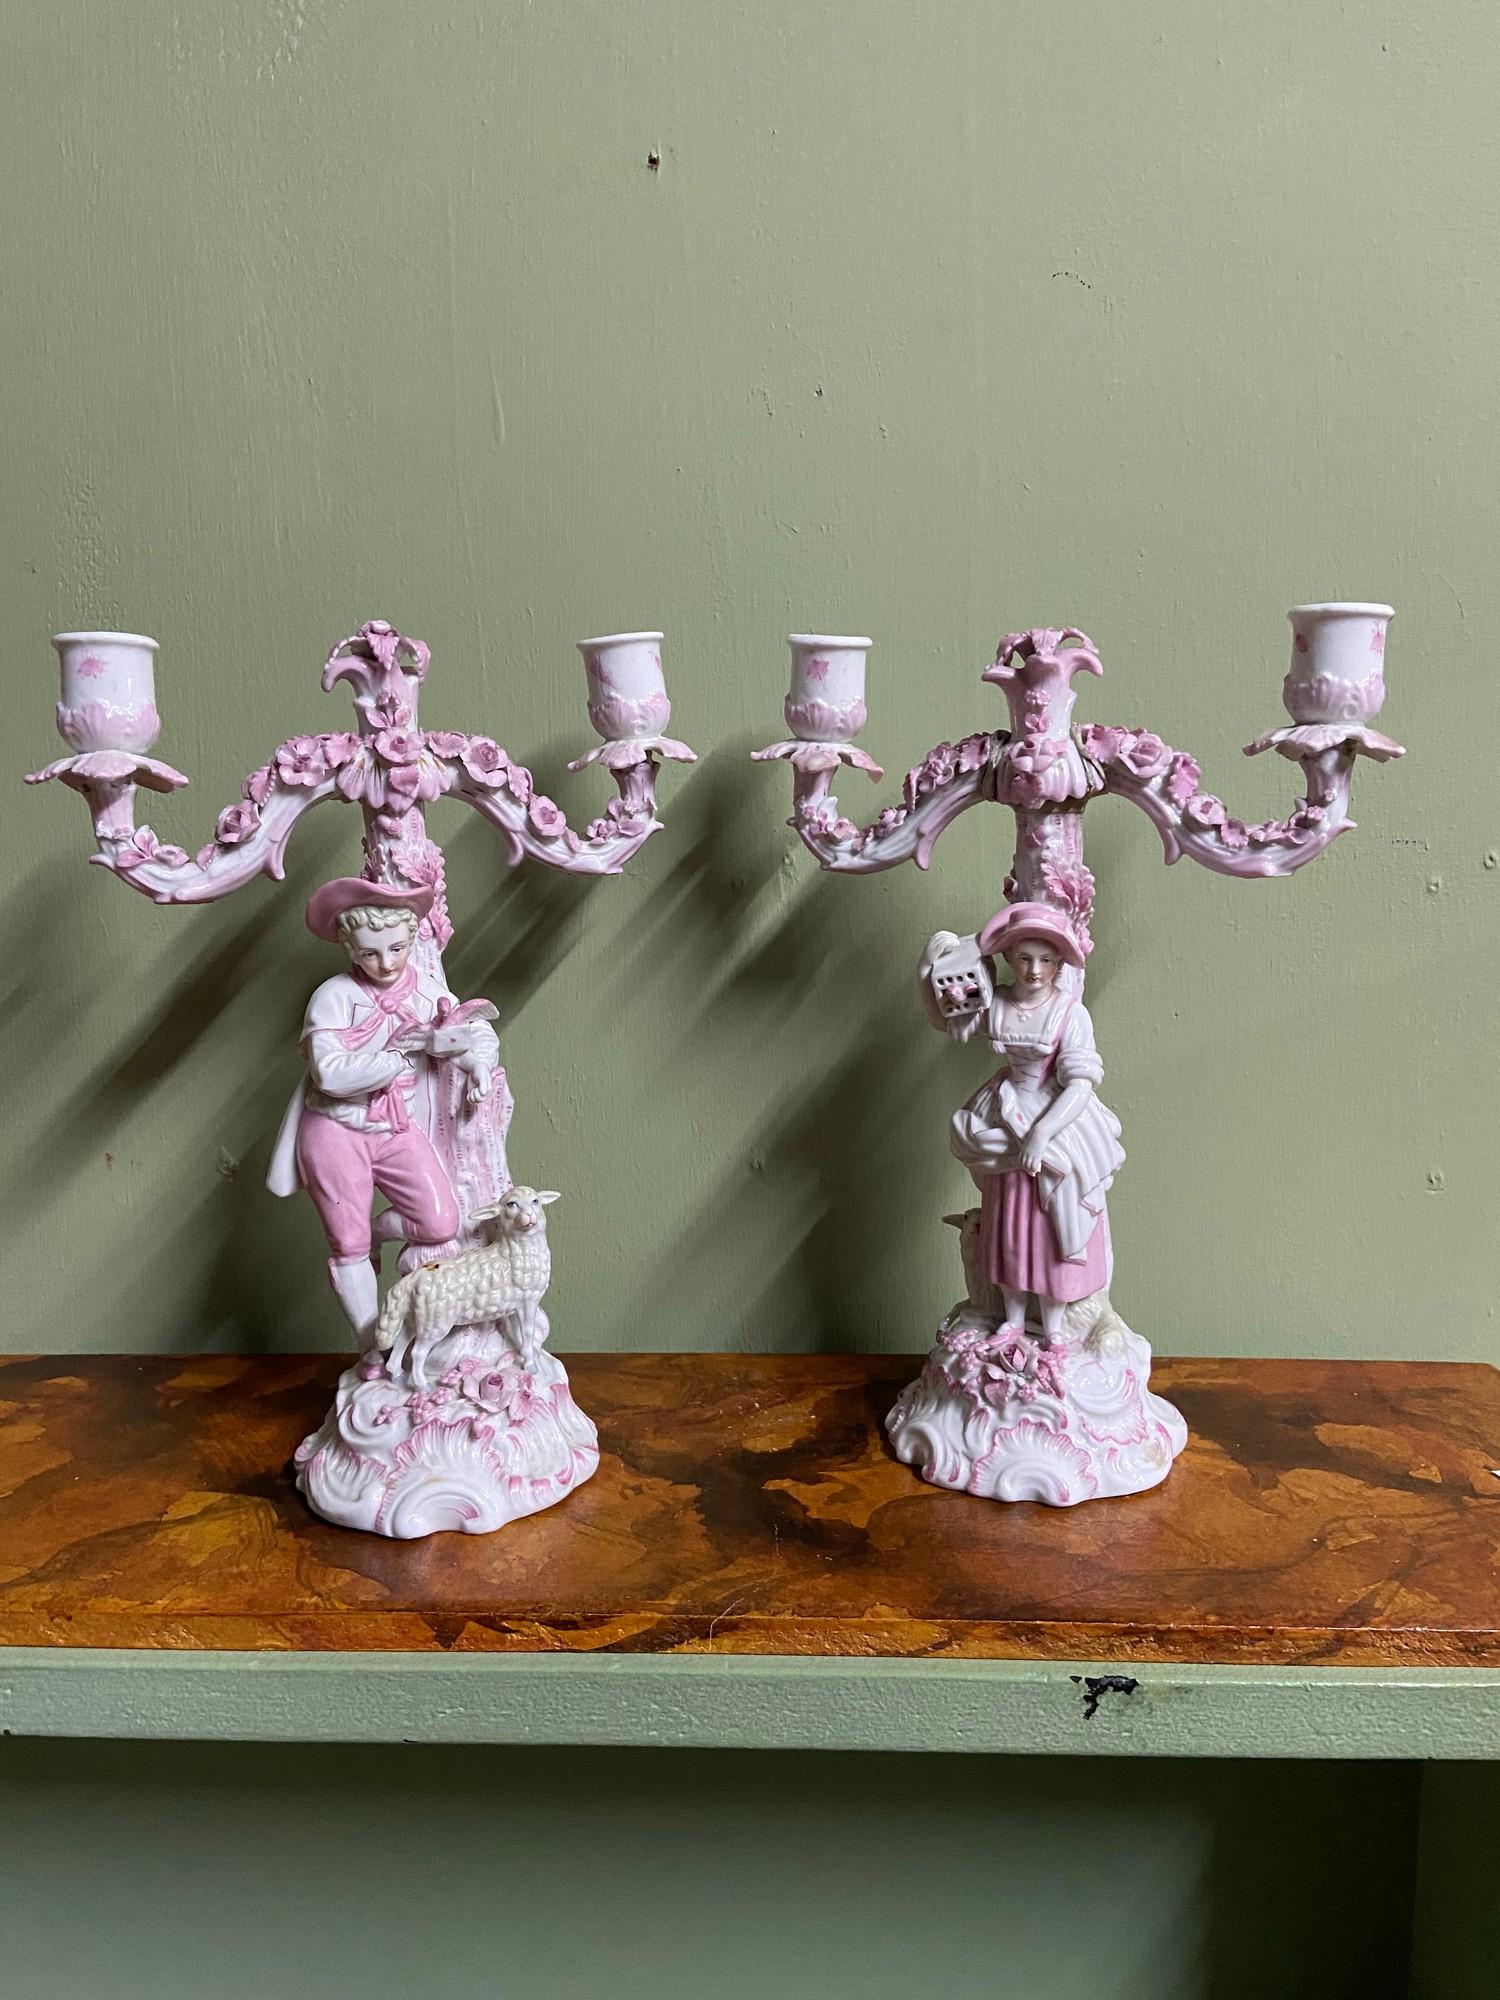 A Pair of possible Joseph-Gaspard Robert porcelain garniture candelabras. Detailed with foliage